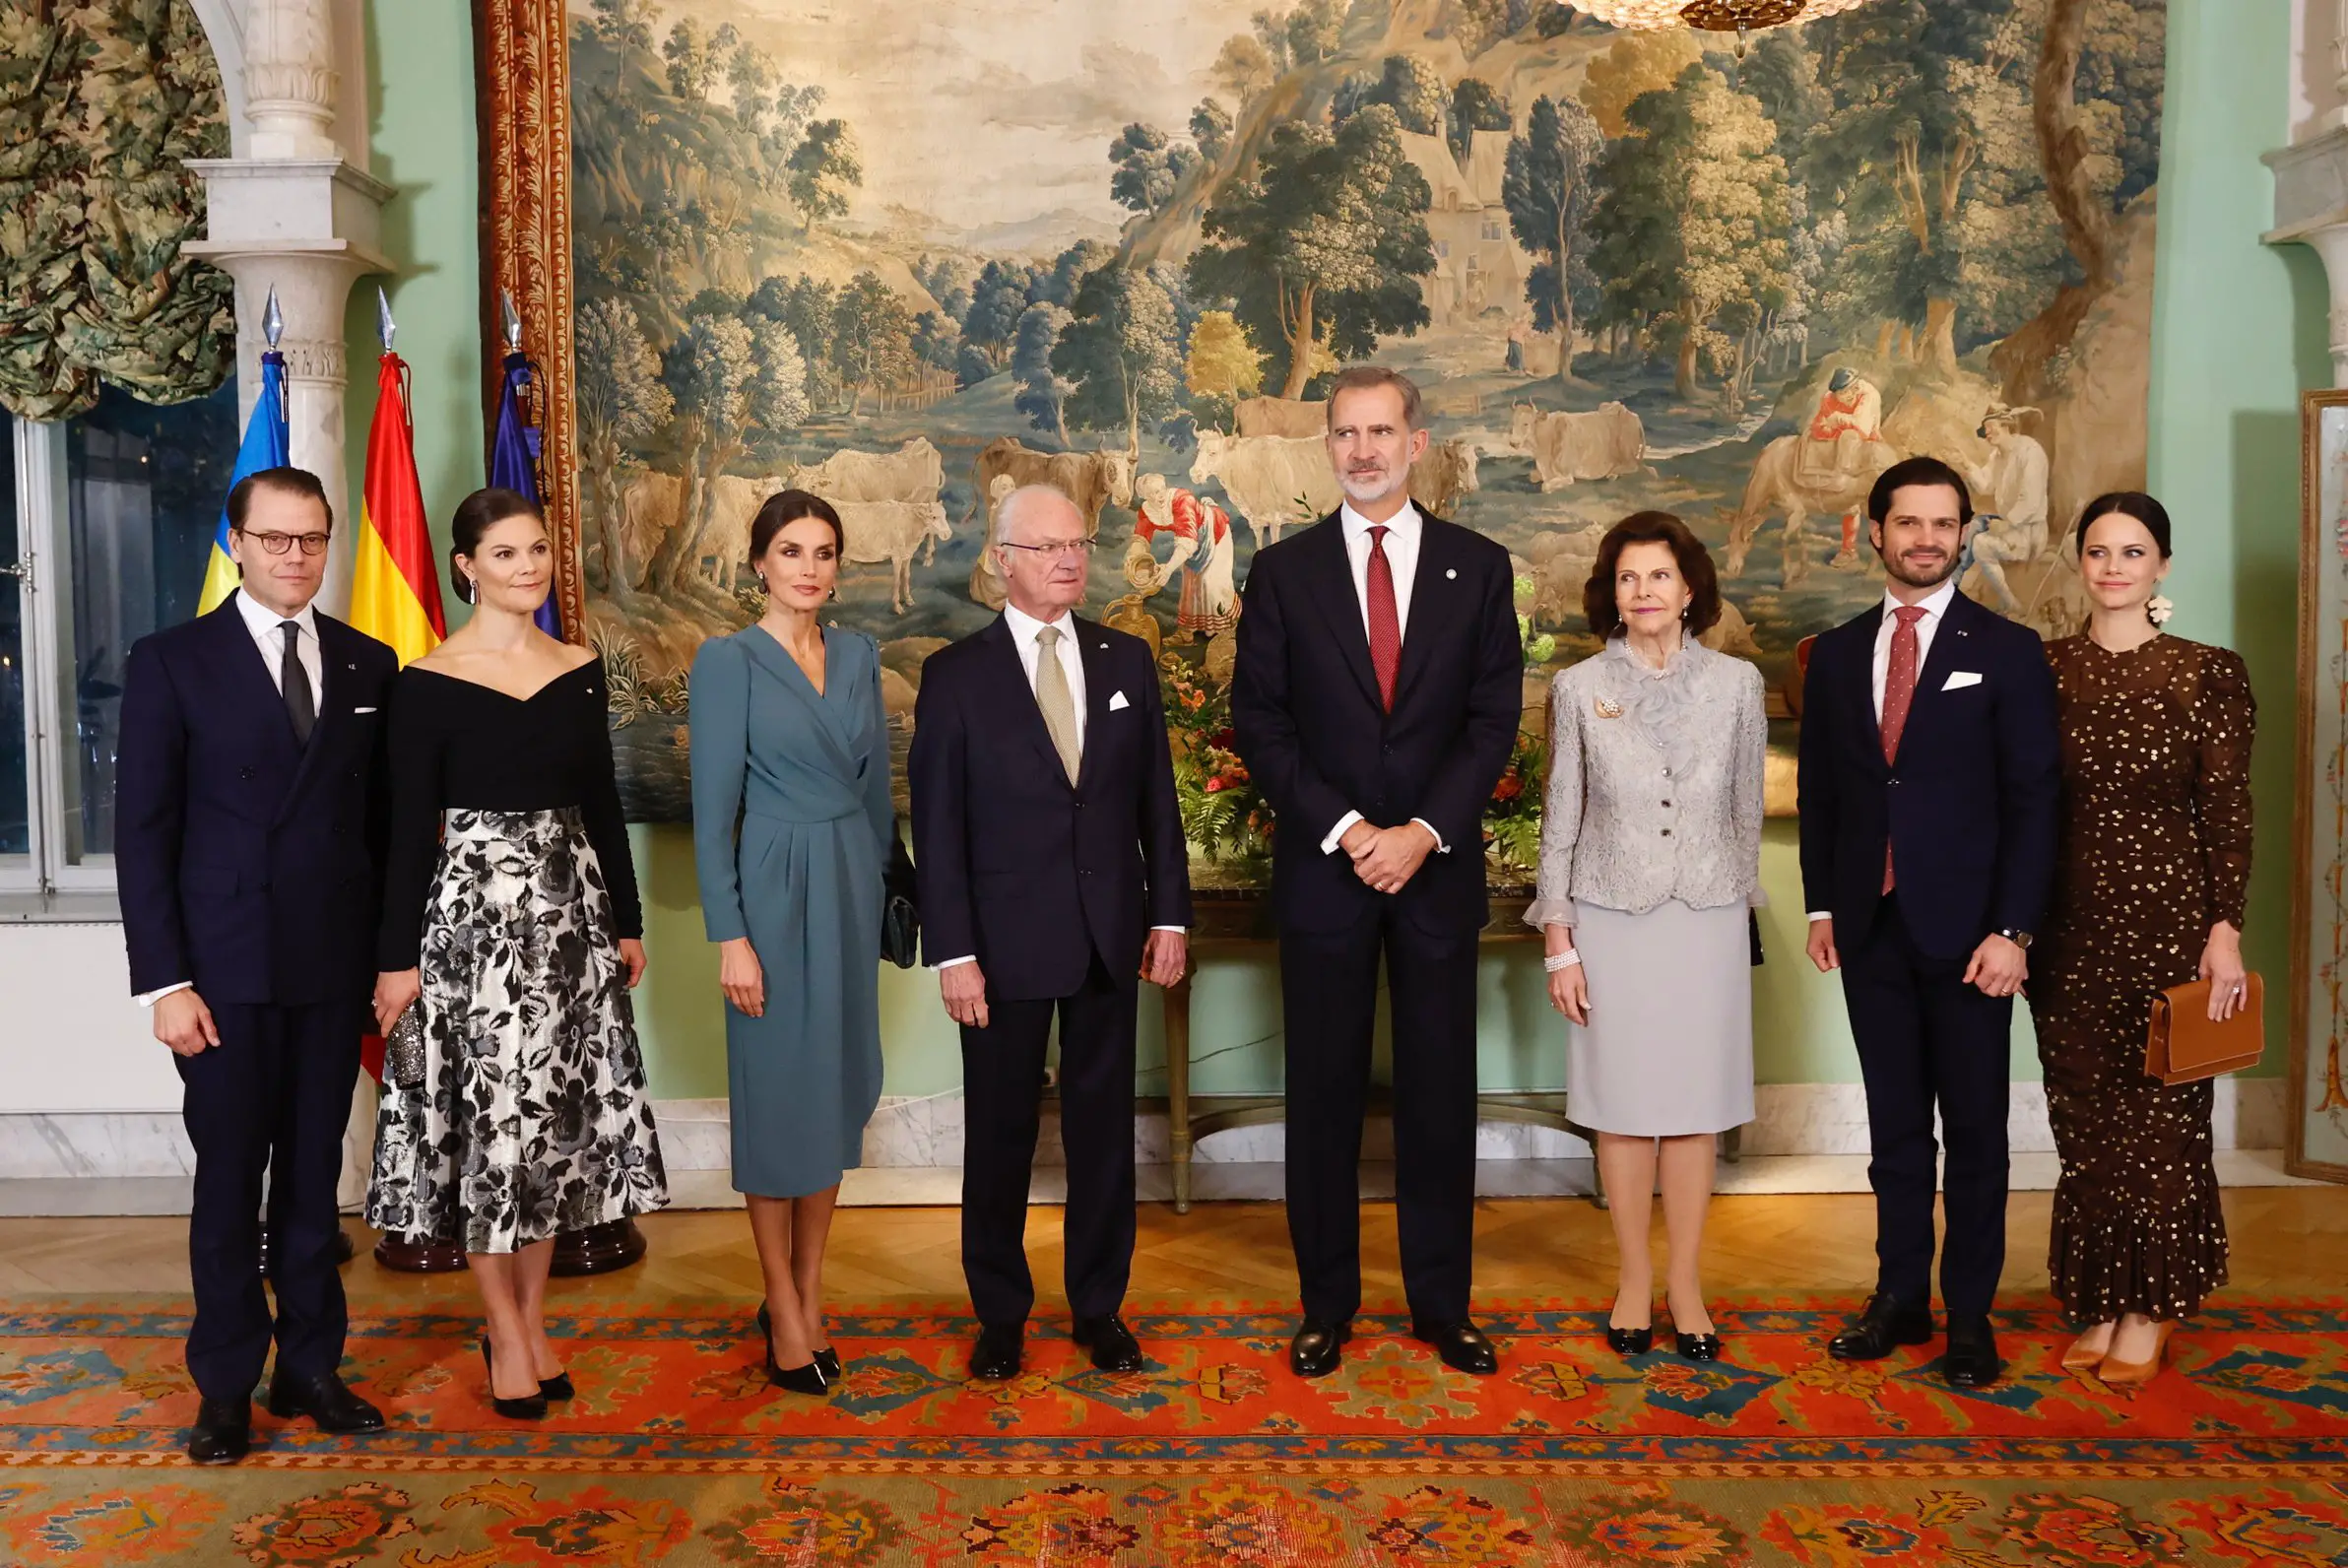 King Felipe and Queen Letizia hosted in the honour of King Carl Gustav and Queen Silvia of Sweden at the Villa Byström